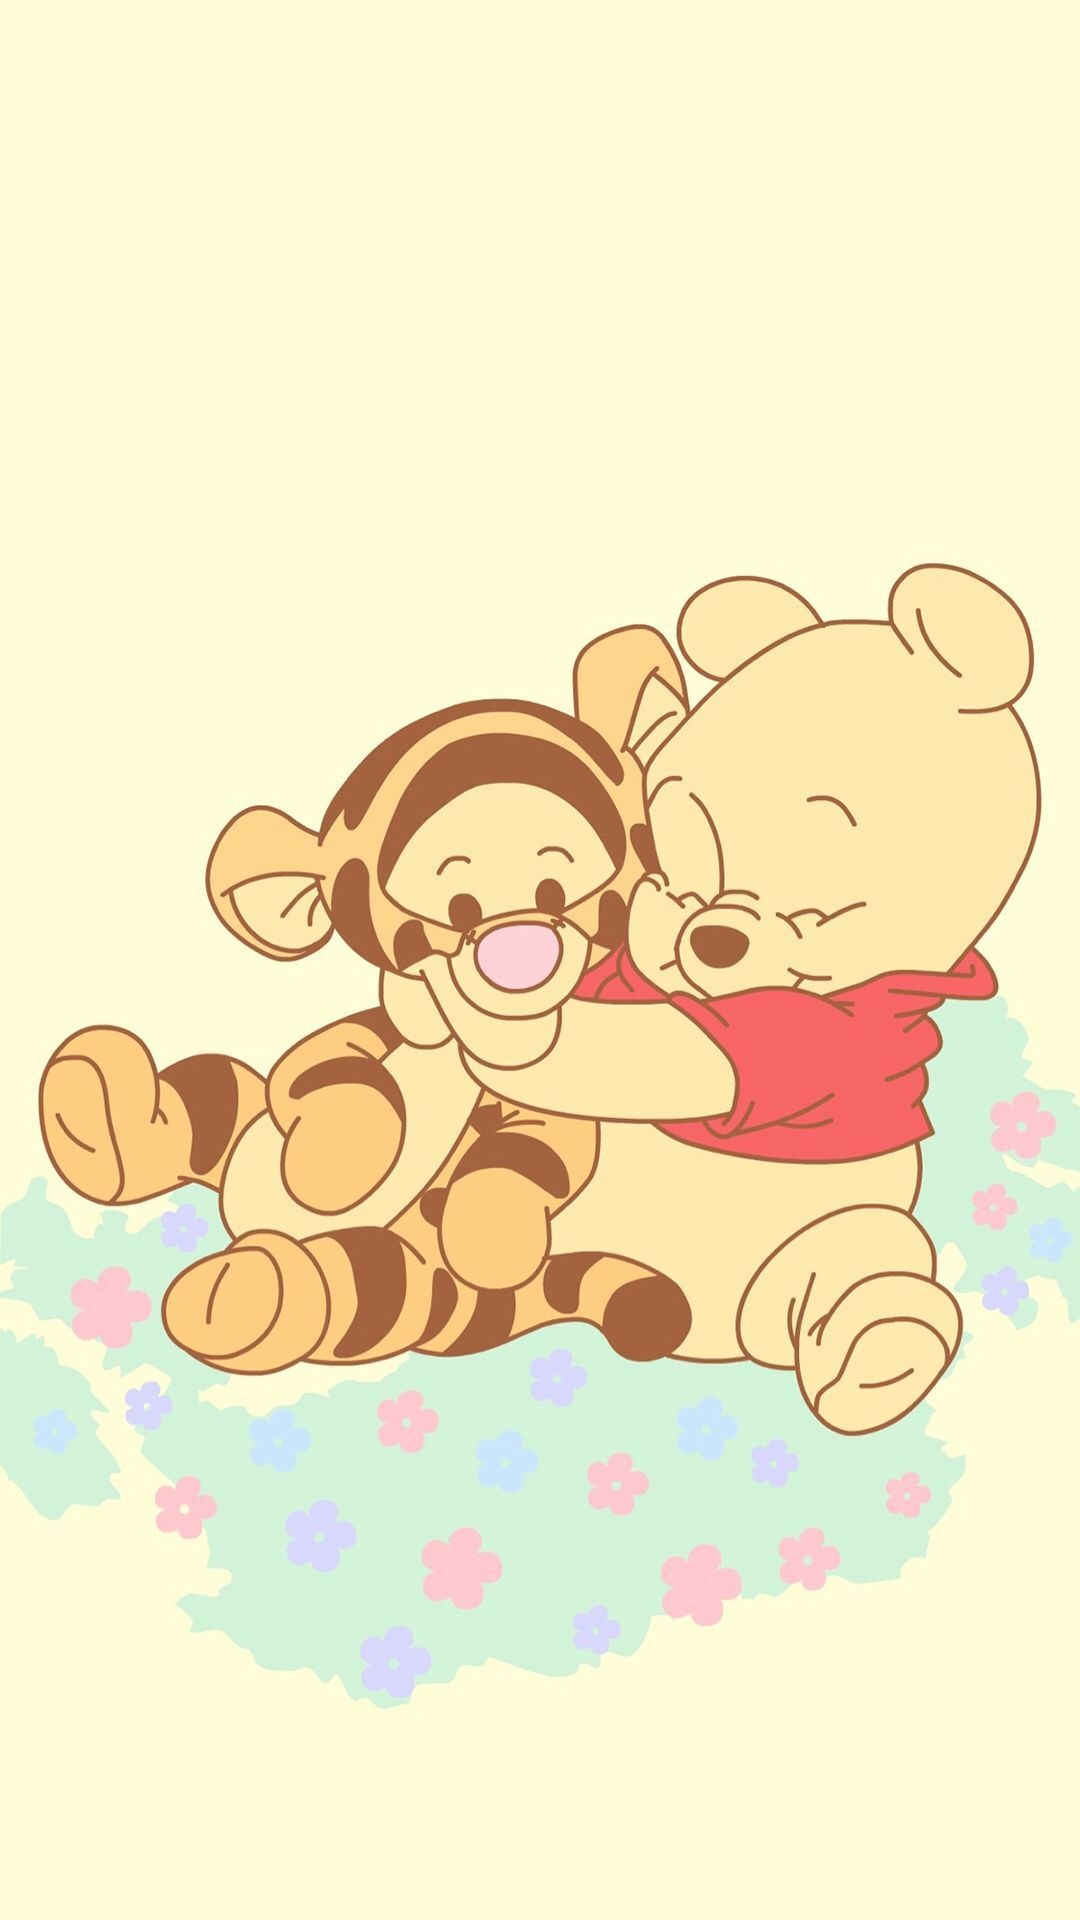 Tigger, Winnie the Pooh wallpapers, Animation, 1080x1920 Full HD Handy